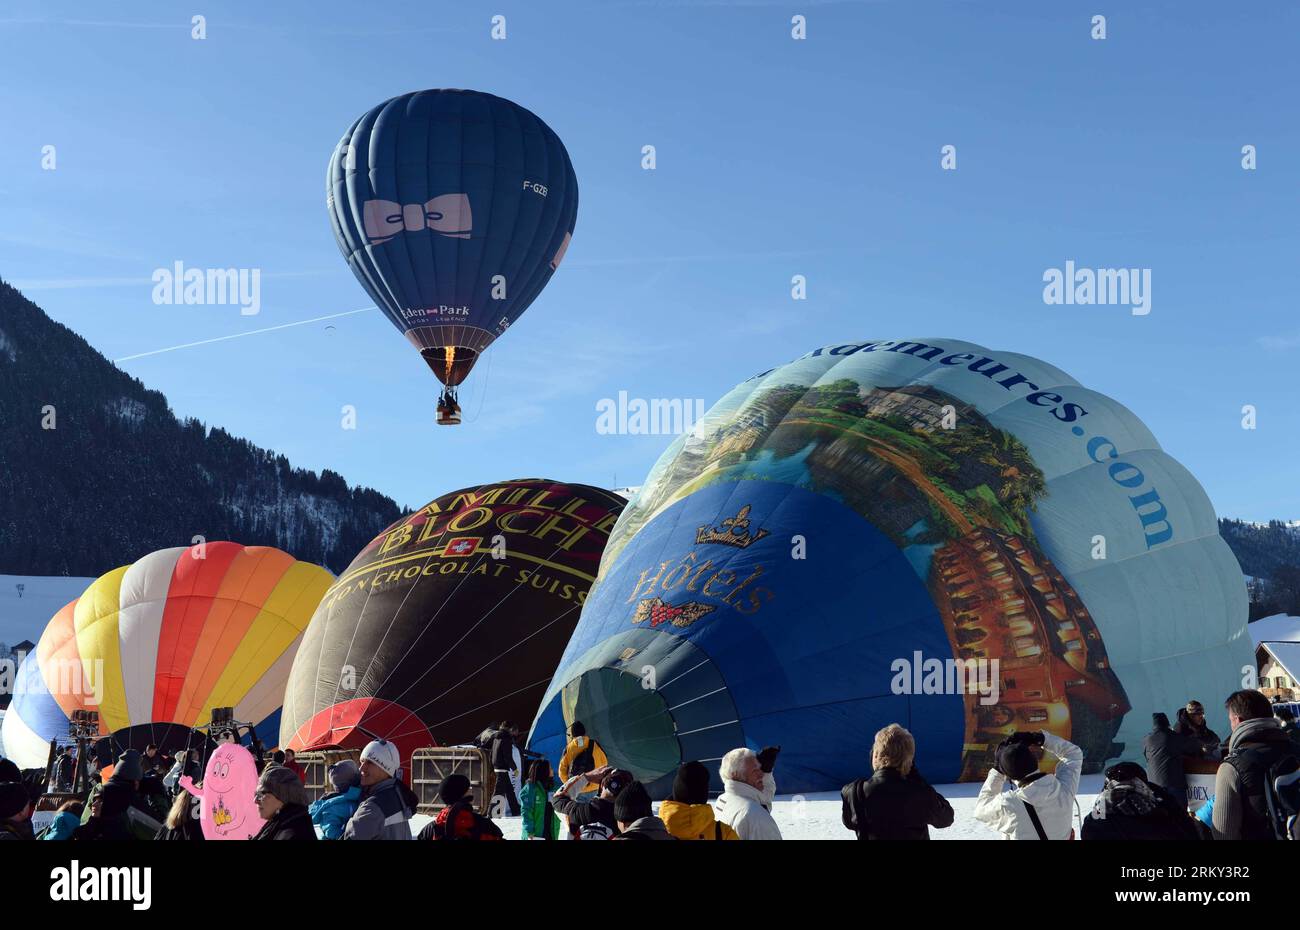 Bildnummer: 59137955  Datum: 26.01.2013  Copyright: imago/Xinhua (130126) -- CHATEAU-D OEX, Jan. 26, 2013 (Xinhua) -- Balloons take off at the 35th International Ballon Festival in Chateau-d Oex, Switzerland, Jan. 26, 2013. The 9-day ballon festival kicked off here on Saturday with the participation of over 80 balloons from 15 countries and regions. (Xinhua/Wang Siwei)(zf) SWITZERLAND-CHATEAU-D OEX-INTERNATIONAL BALLOON FESTIVAL PUBLICATIONxNOTxINxCHN Gesellschaft Ballon Heissluftballon Ballonfestival Ballonfahrt Alpen x0x xst 2013 quer premiumd      59137955 Date 26 01 2013 Copyright Imago XI Stock Photo